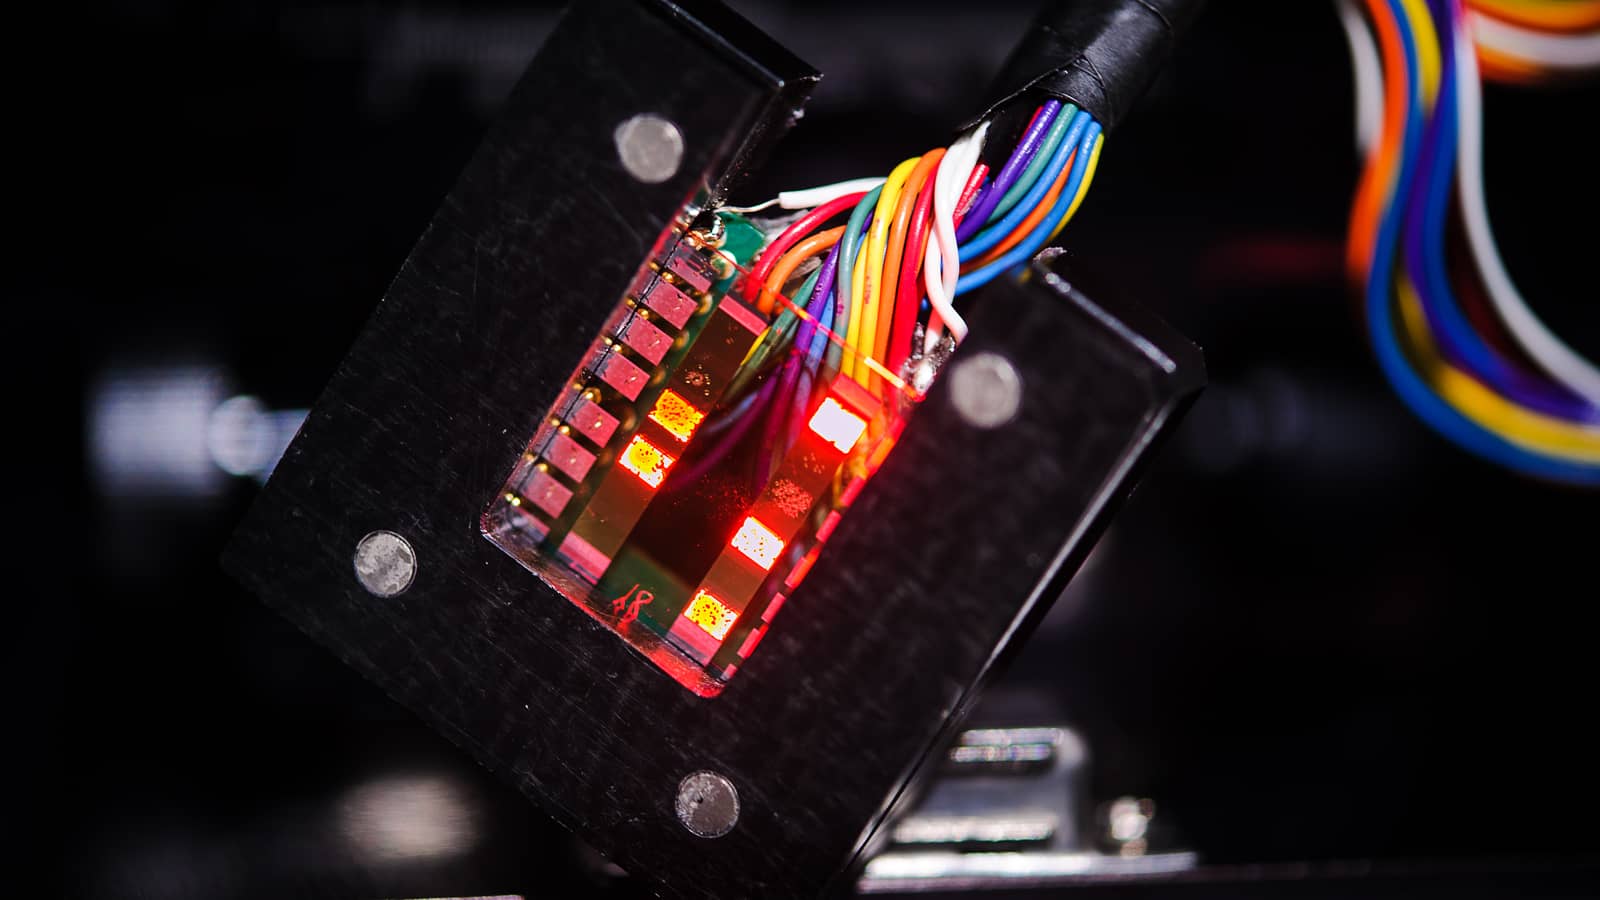 A colorful electronic device using L-E-D's that are lighted up.